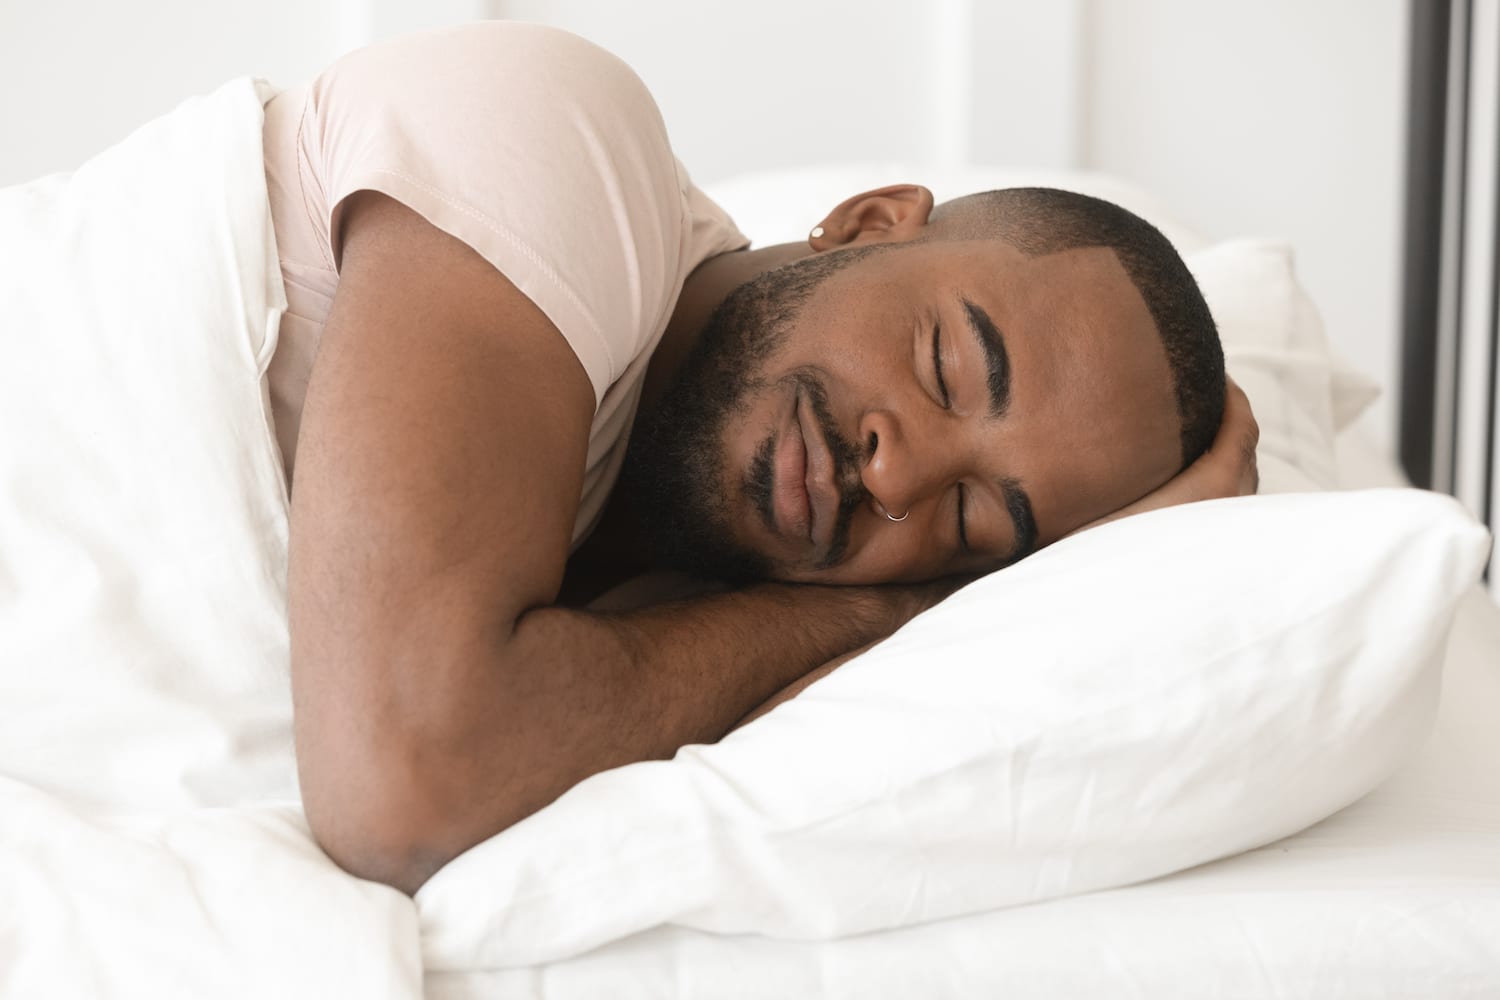 Facts About Sleep: Debunking Myths